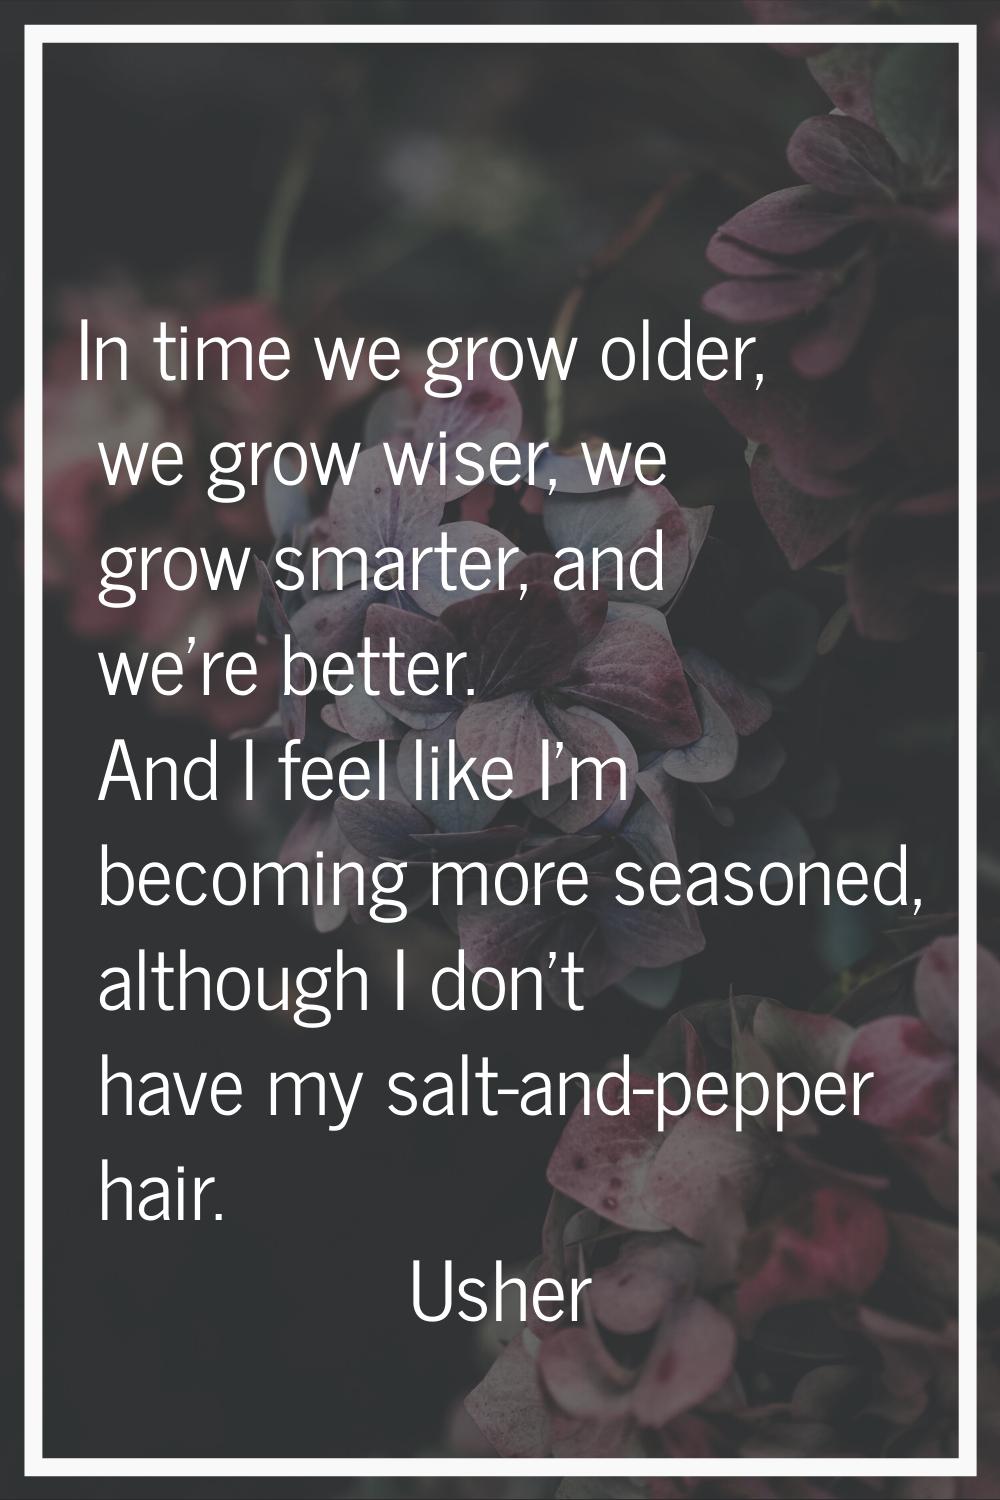 In time we grow older, we grow wiser, we grow smarter, and we're better. And I feel like I'm becomi